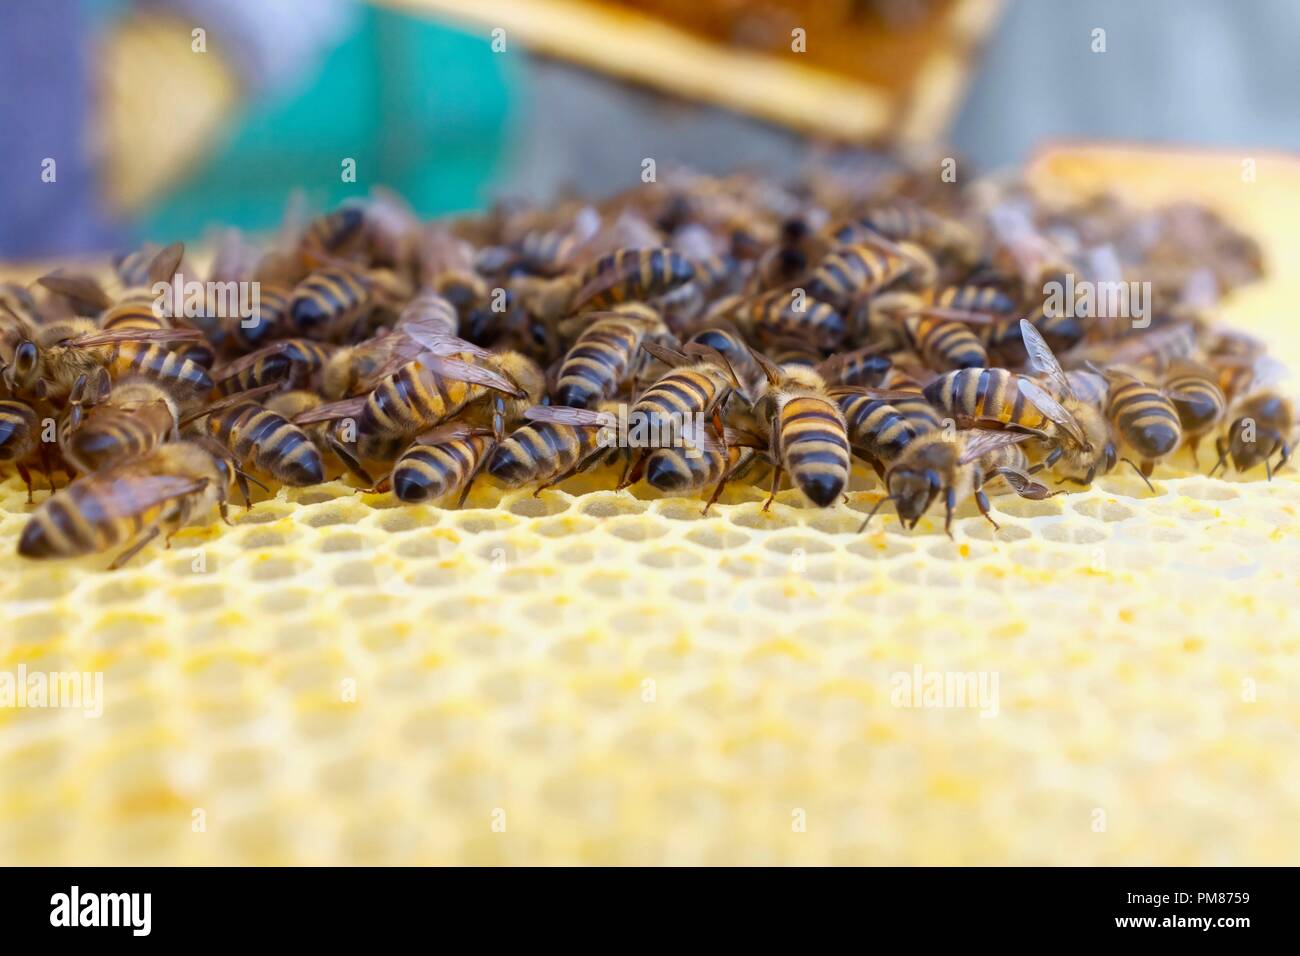 lots of bees on brood frame Stock Photo